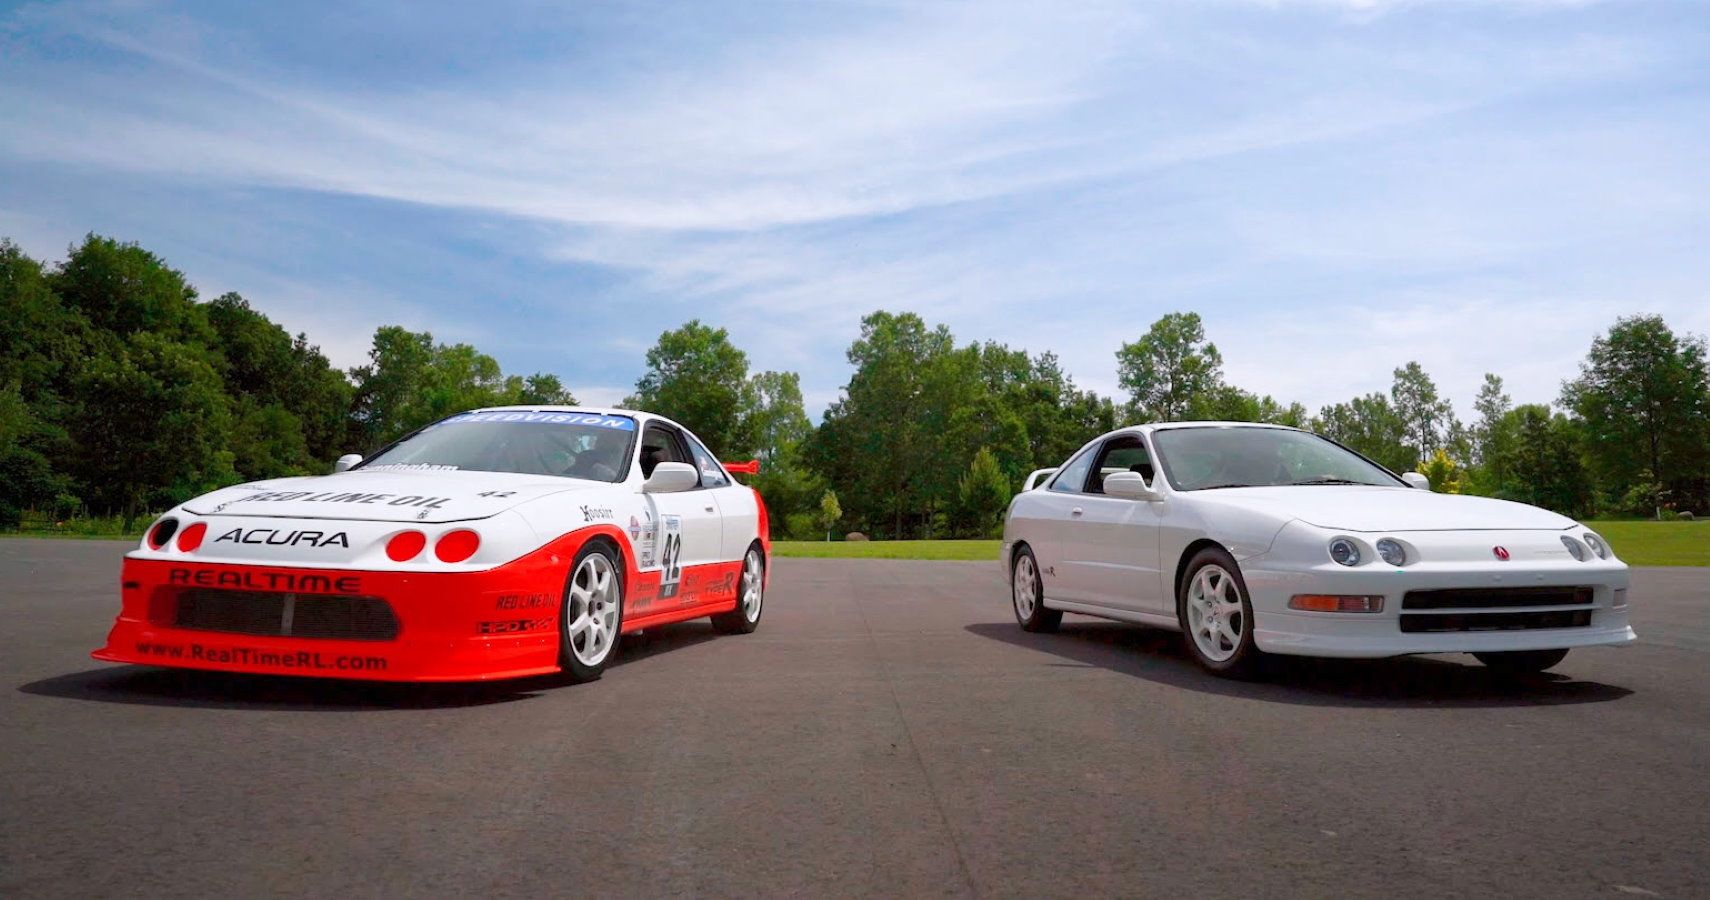 Legendary Integra Type R Racecar Screams Back to the Track at 9,000 rpm